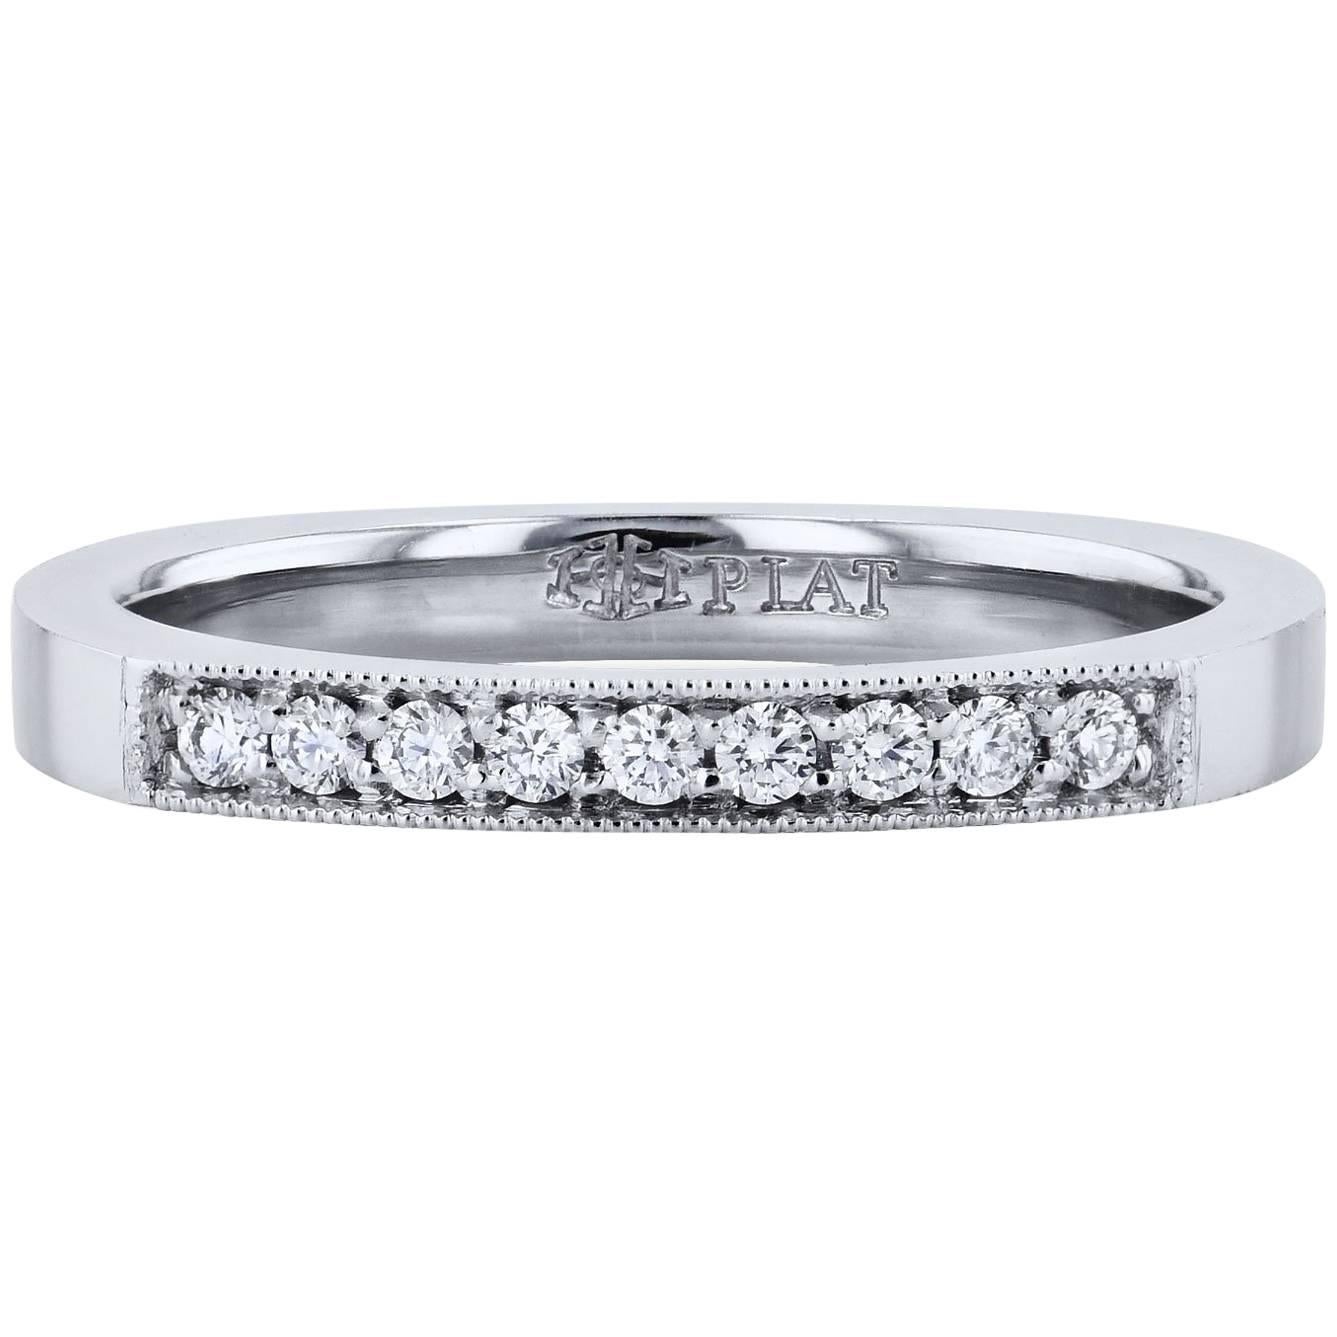 H&H 0.10 Carat Diamond Band Ring in Platinum For Sale